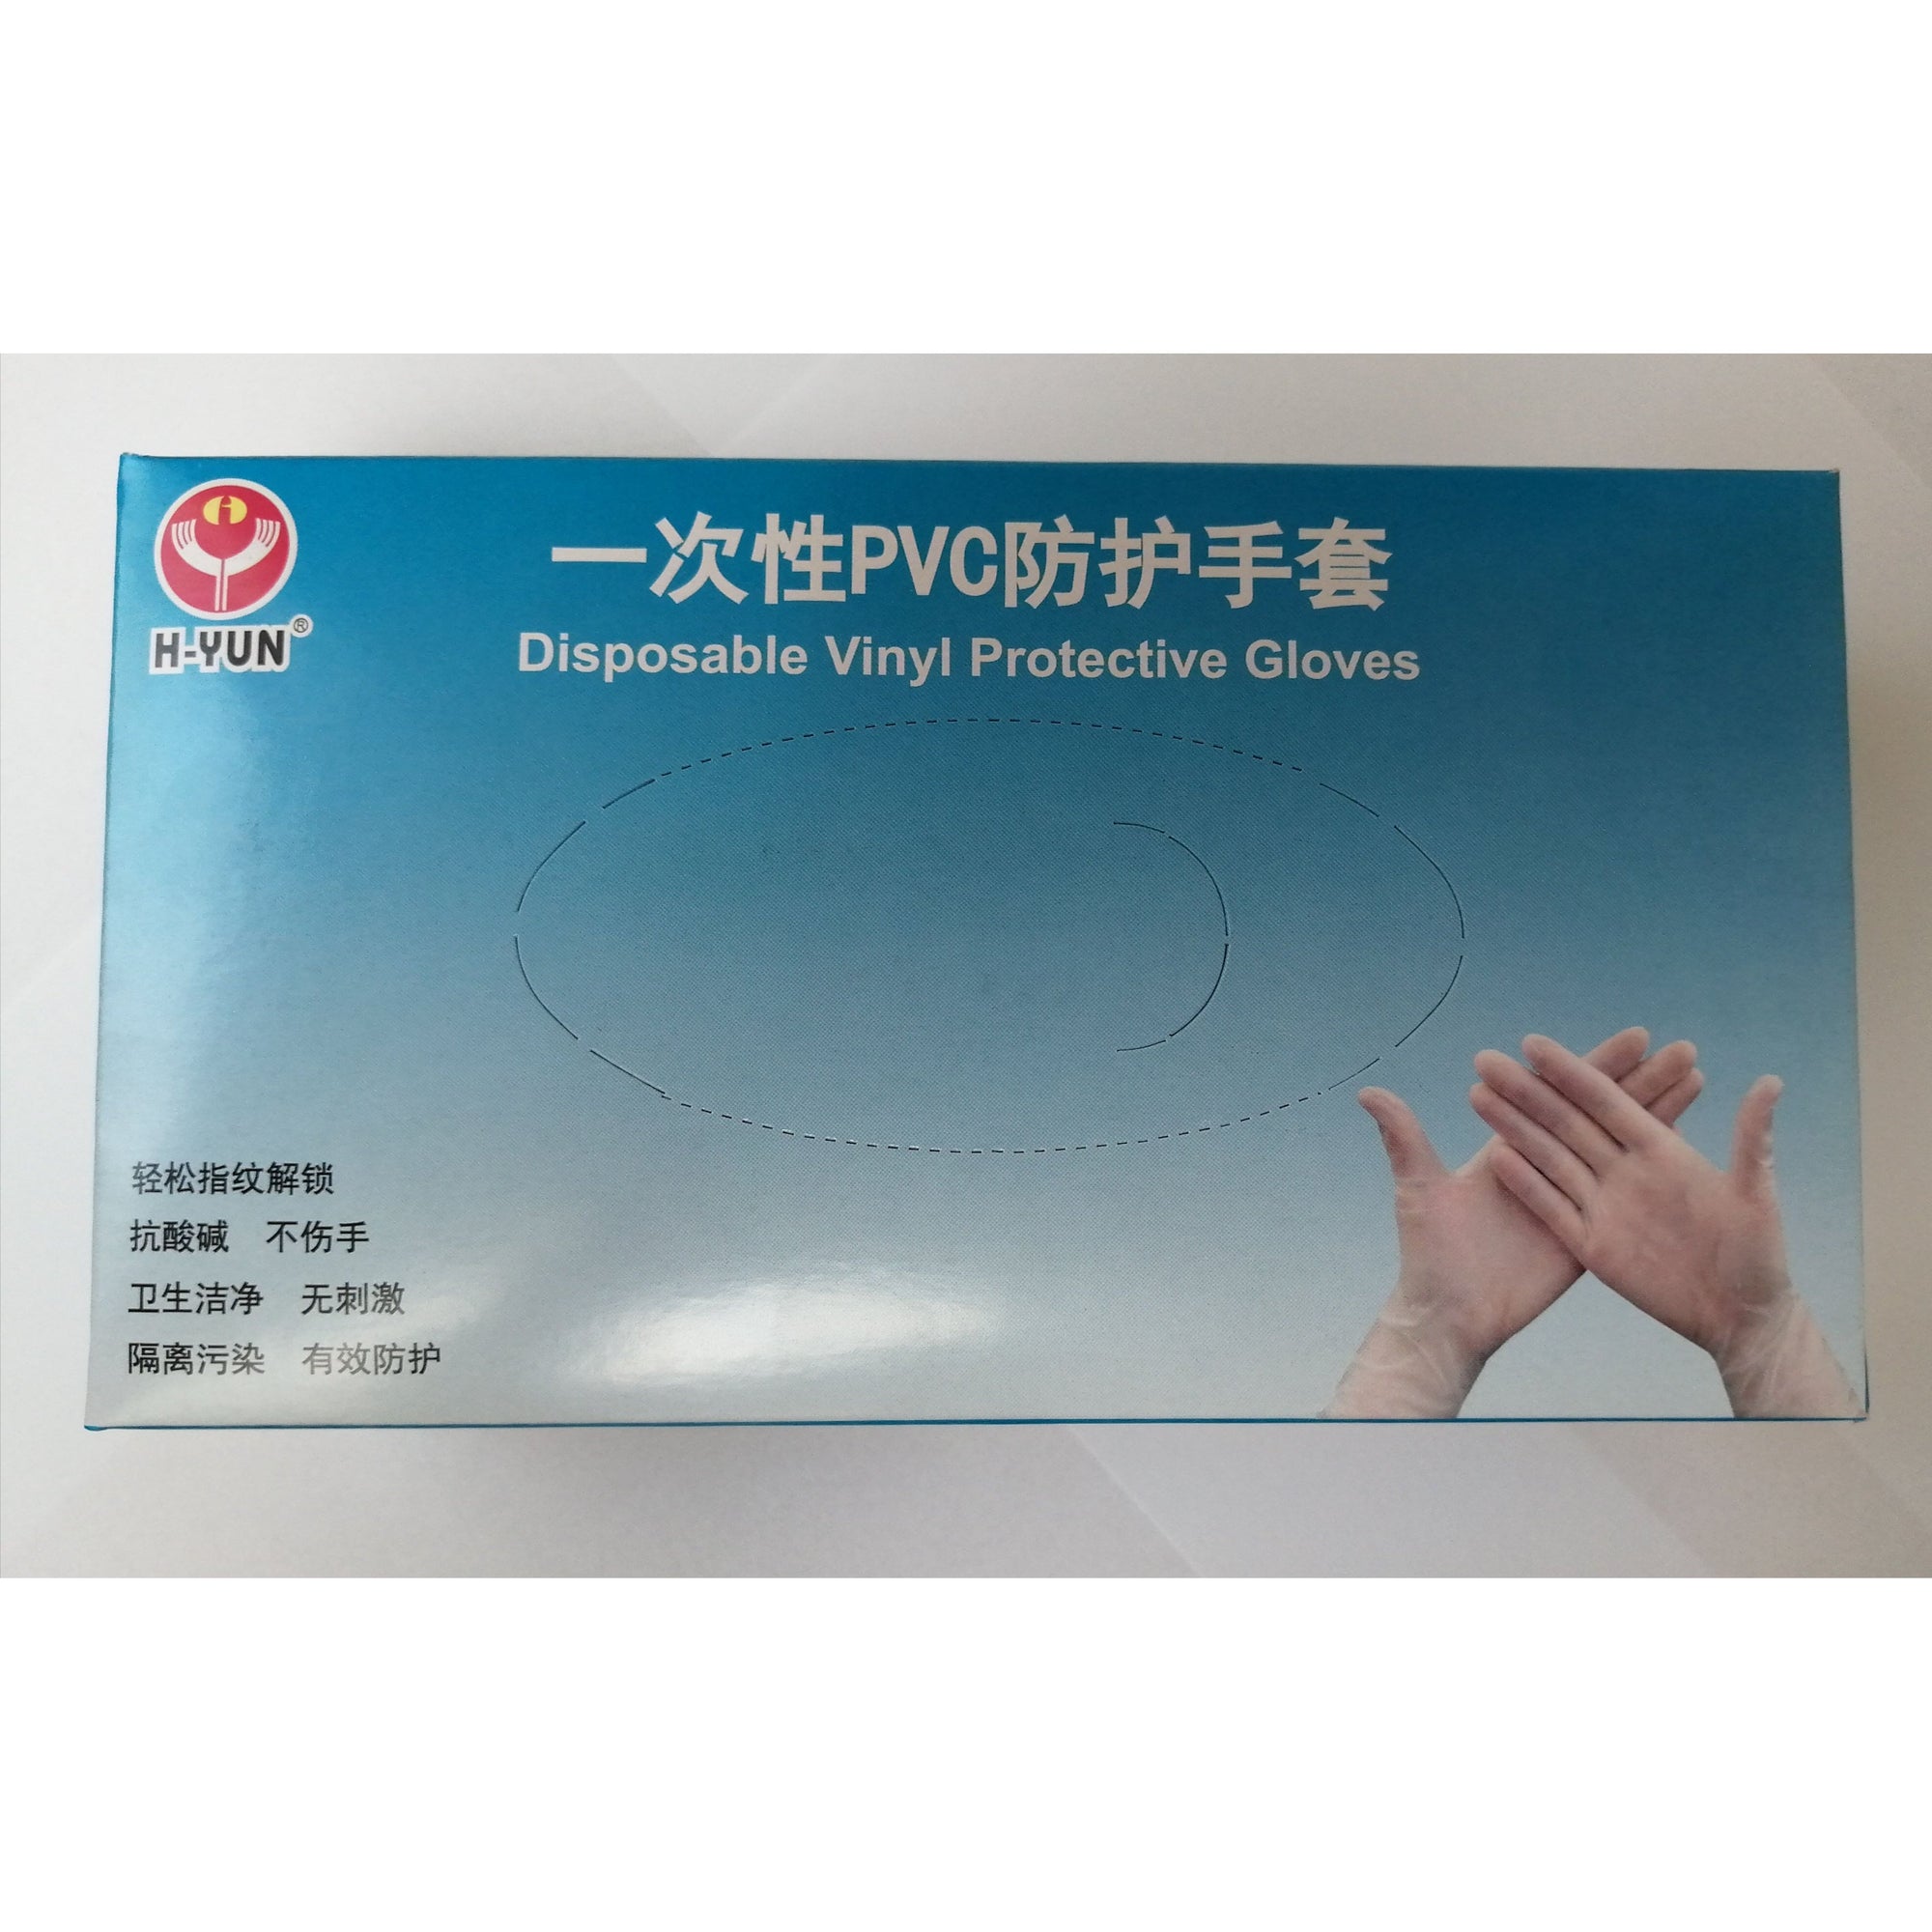 Disposable Vinyl Protective Gloves 100